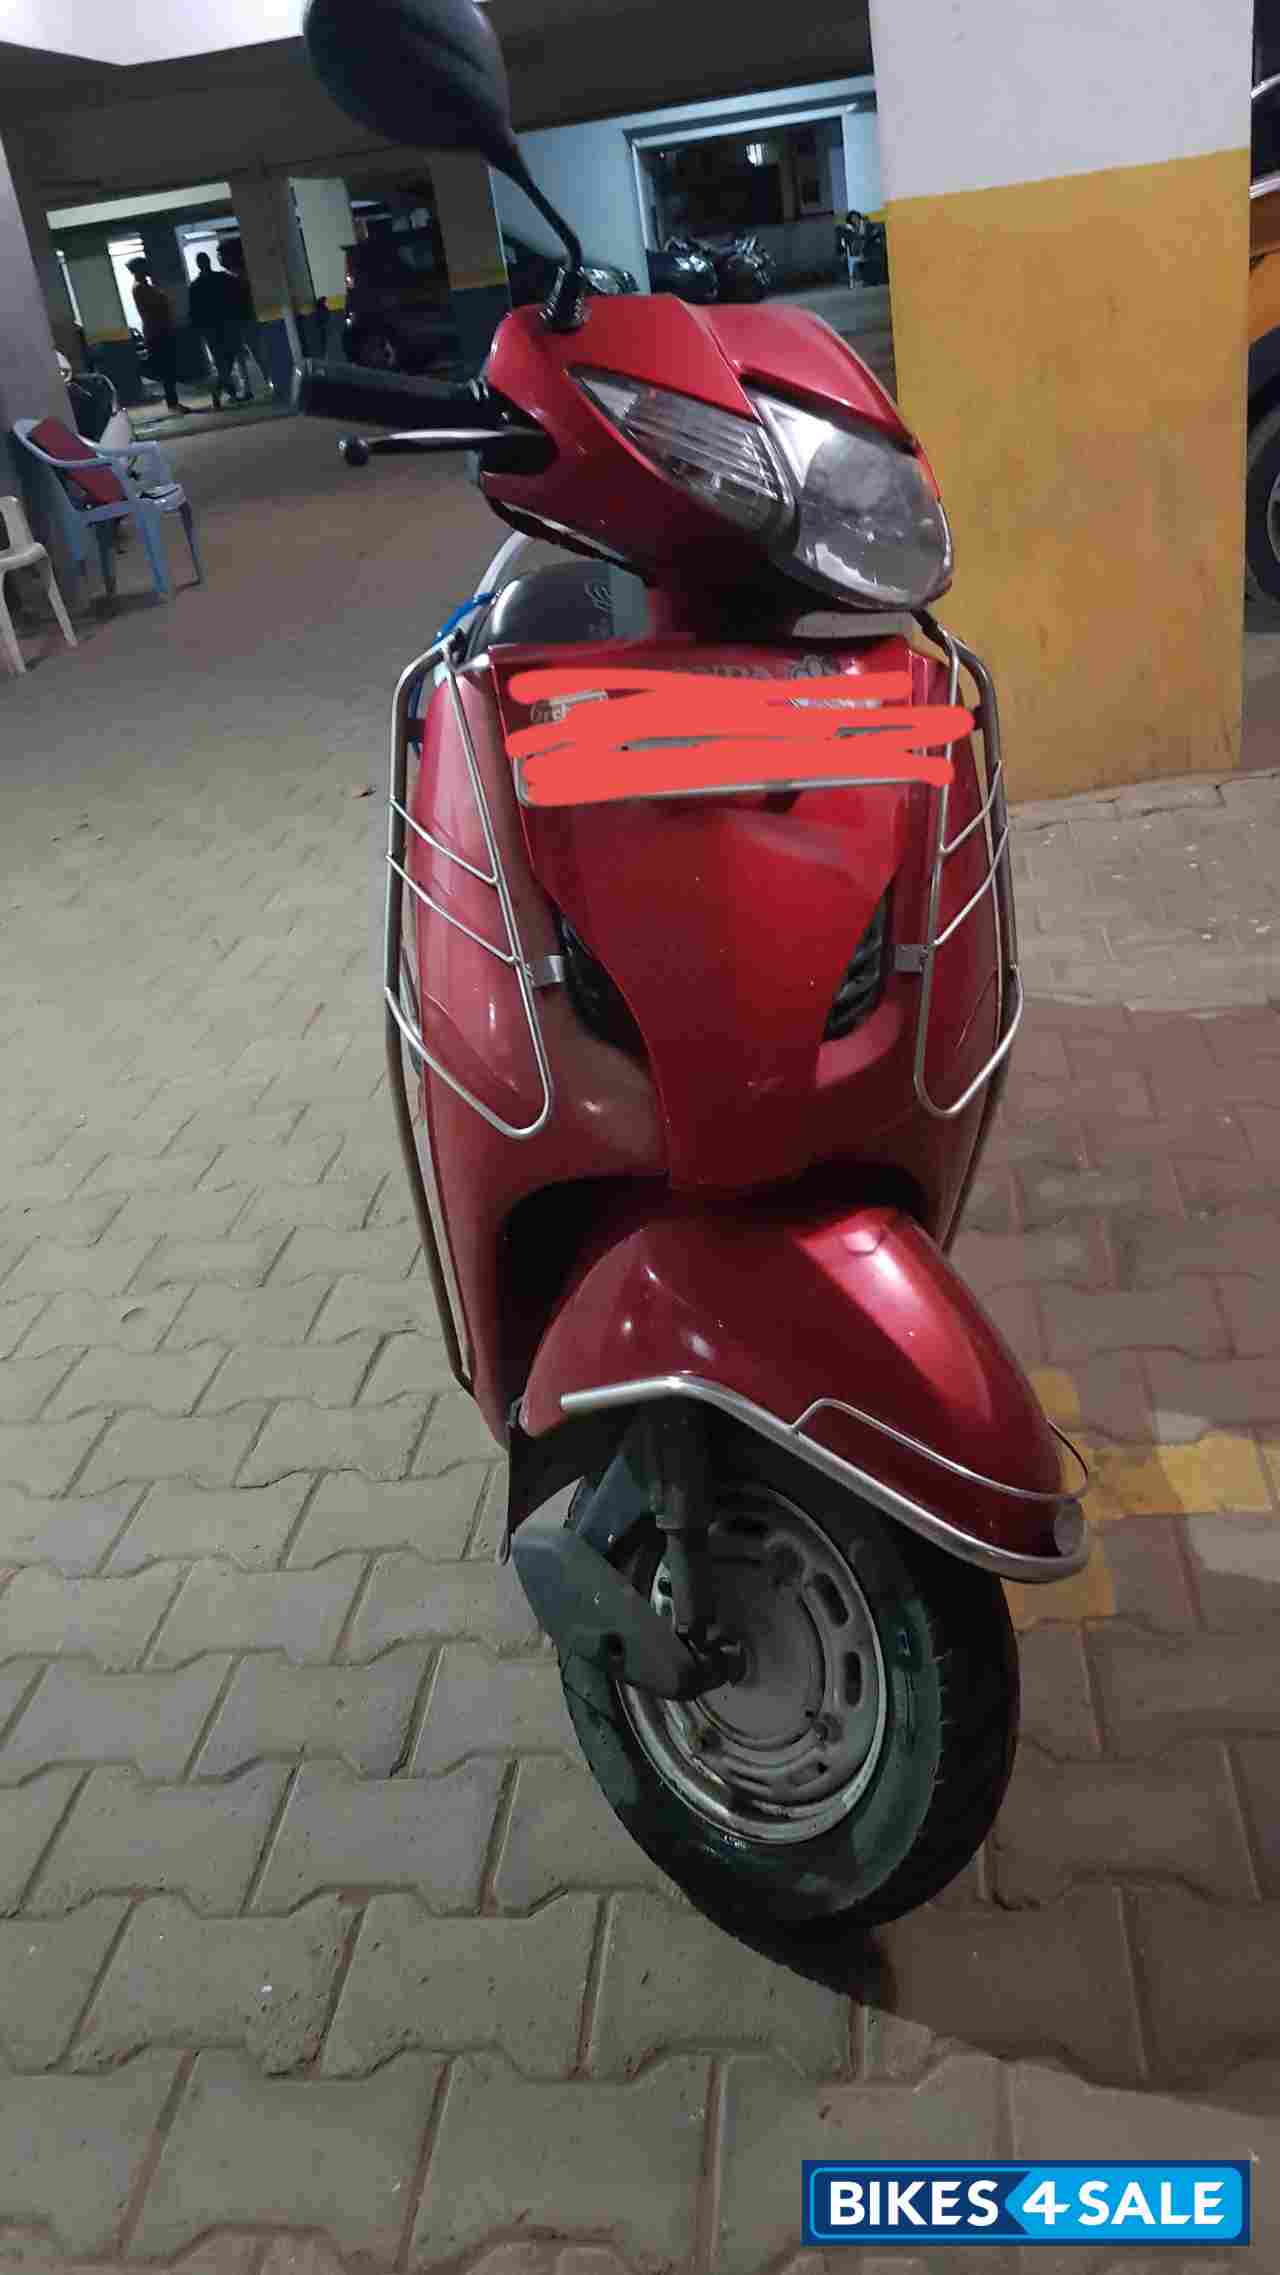 Used 2013 model Honda Activa for sale in Bangalore. ID ...